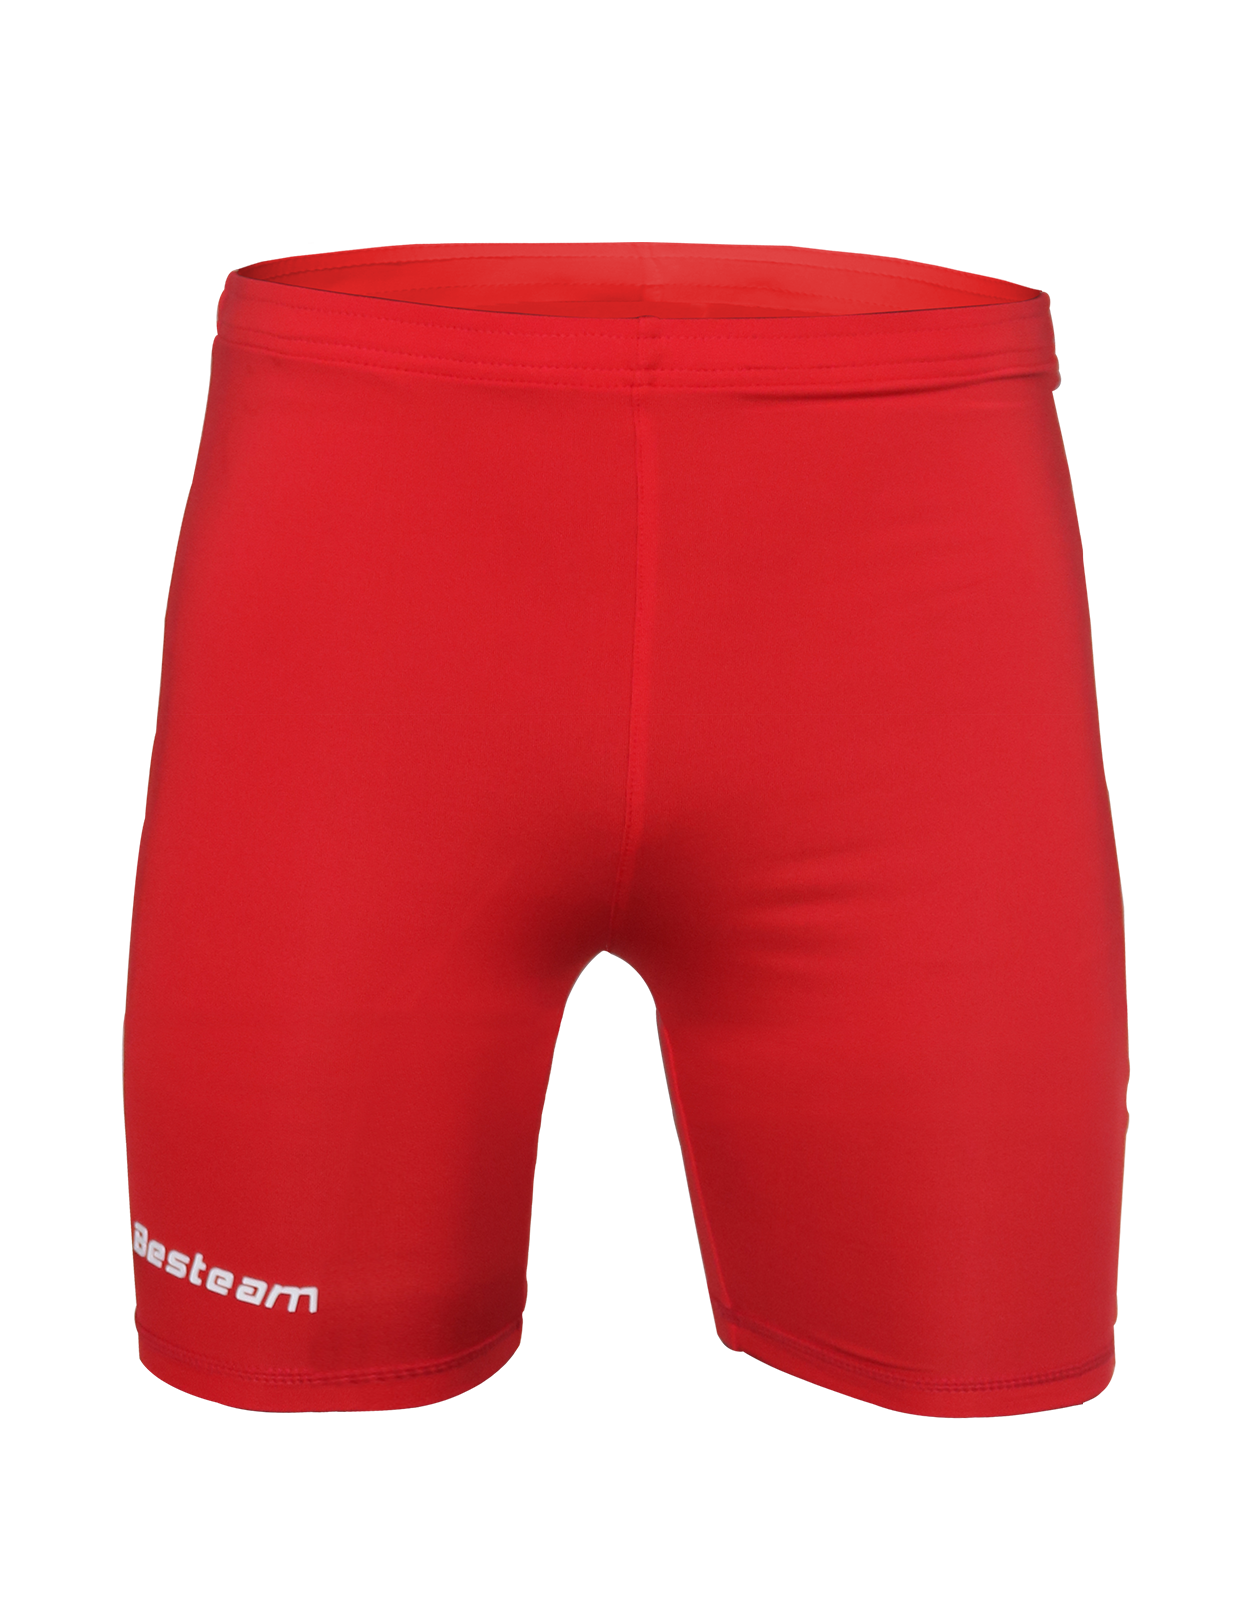 Mens Compression Shorts | Red